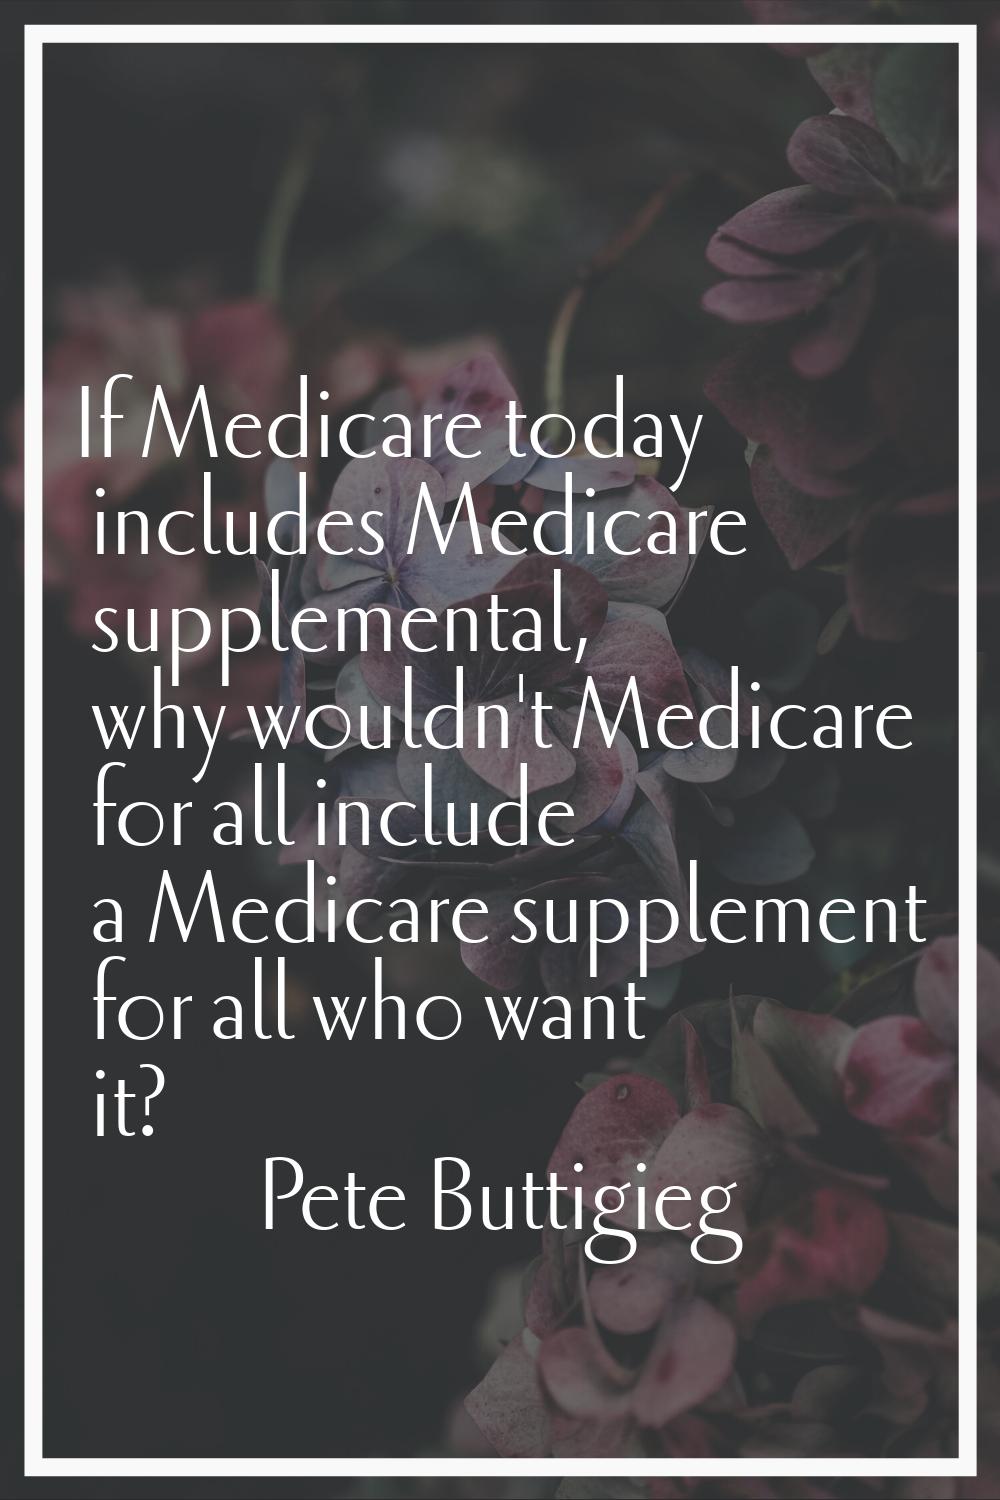 If Medicare today includes Medicare supplemental, why wouldn't Medicare for all include a Medicare 